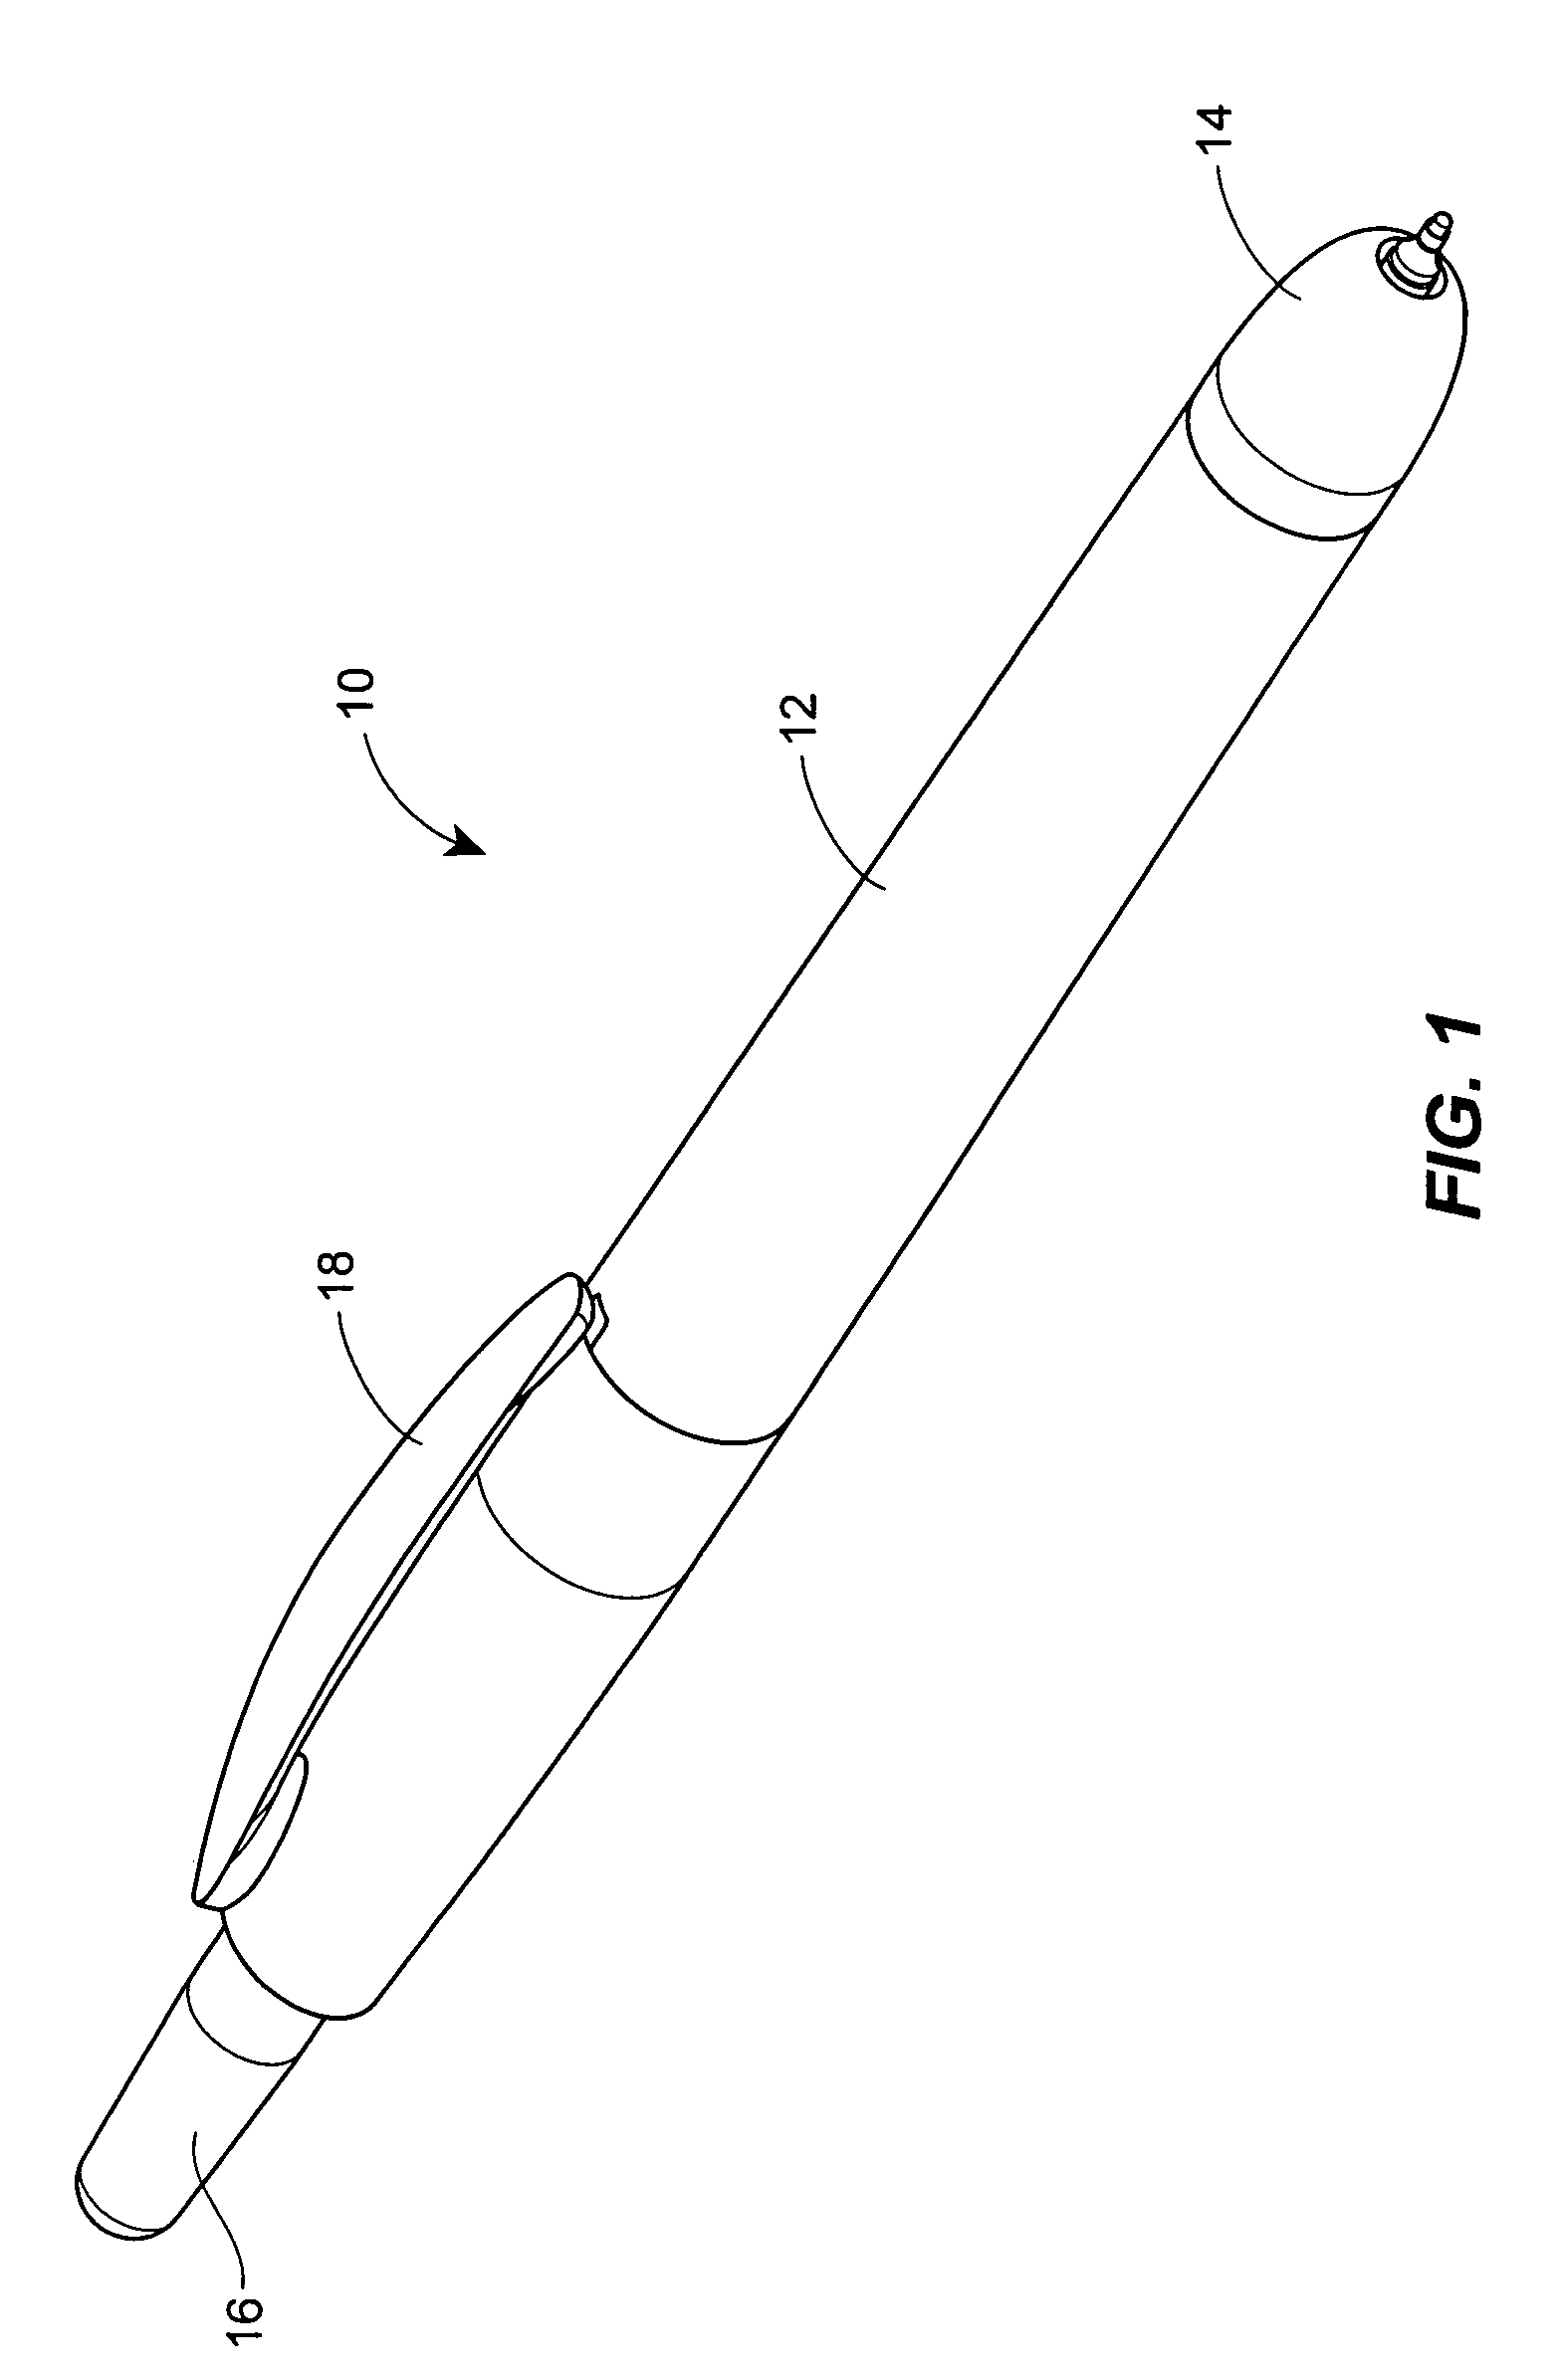 Seal assembly for retractable instrument